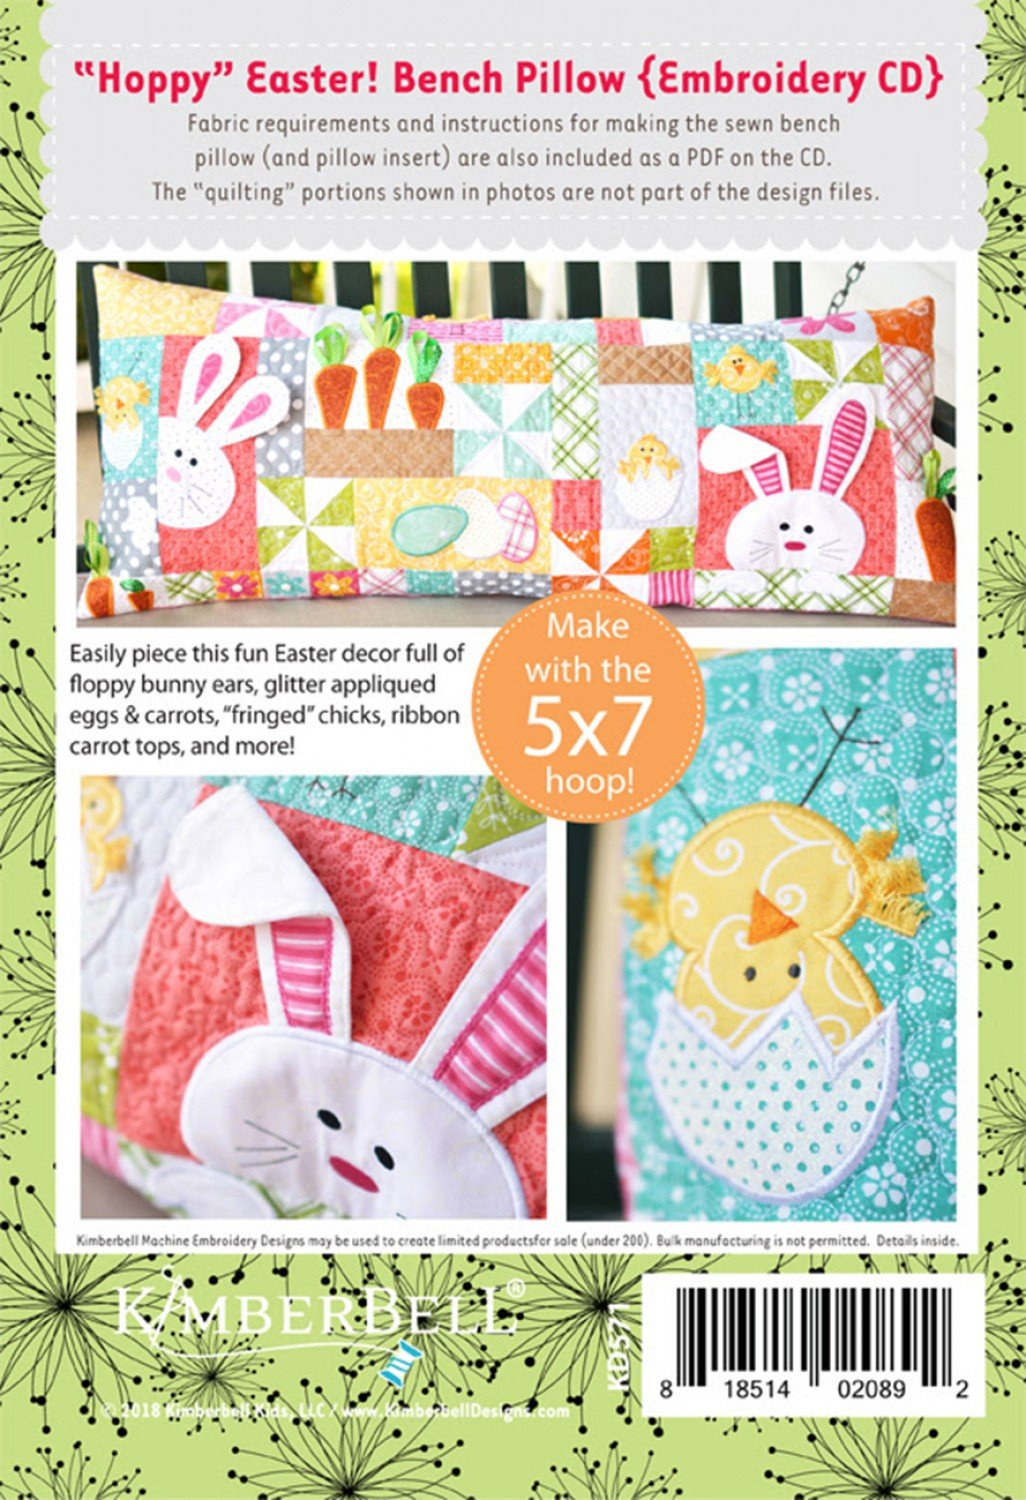 Fun Embroidery Patterns Hoppy Easter Pillows Bench Pillow Machine Embroidery Cd Kd571